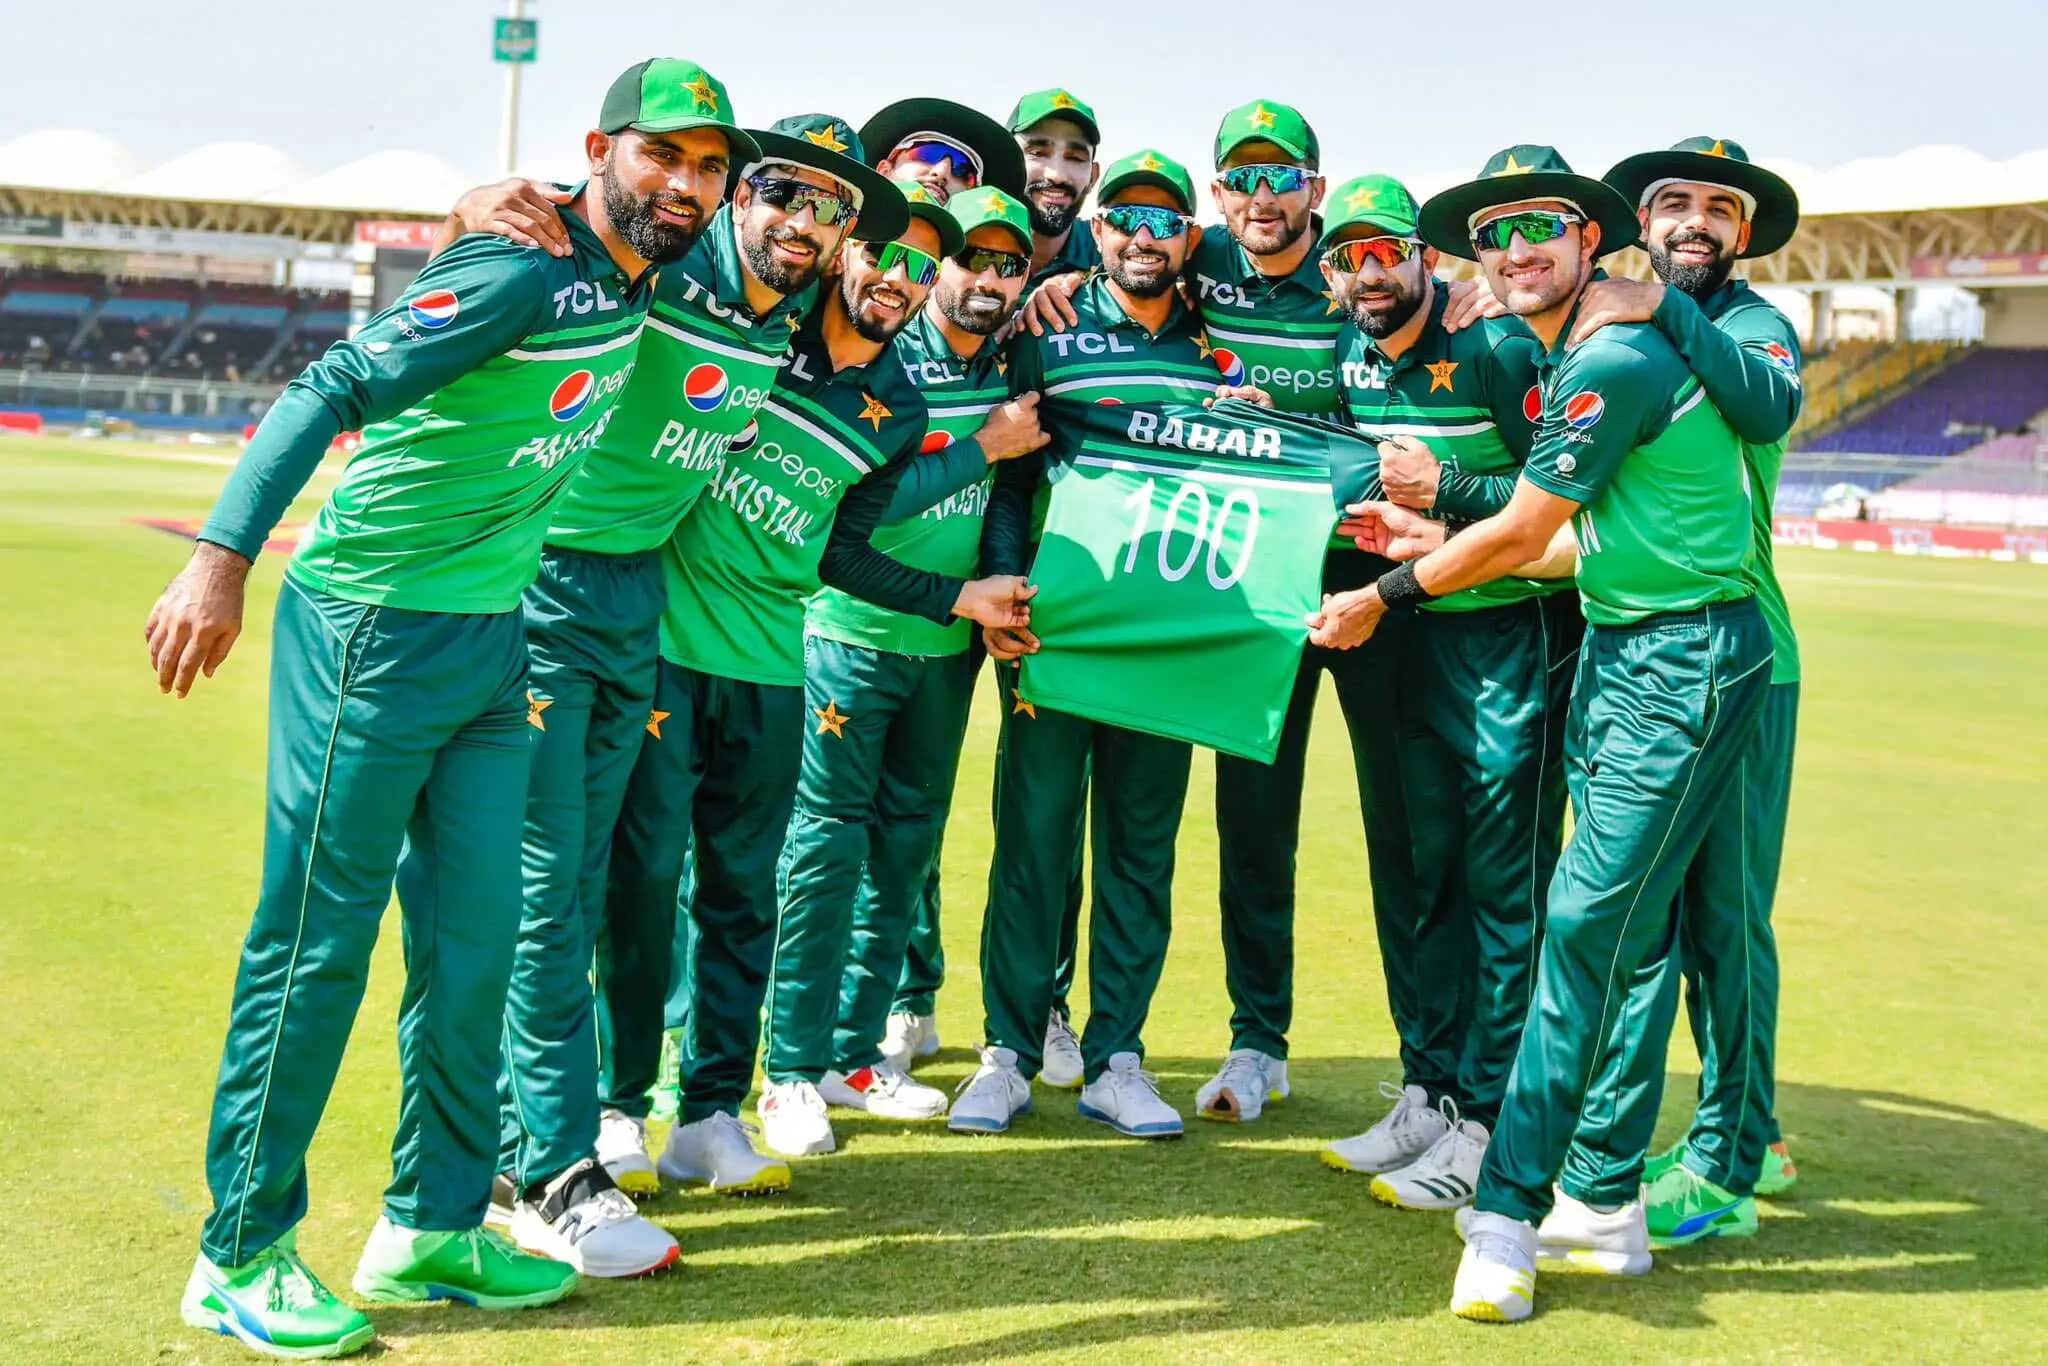 World Cup 2023 | Pakistan Likely To Avoid Mumbai as Their Semi-Final Venue Due To Security Reasons